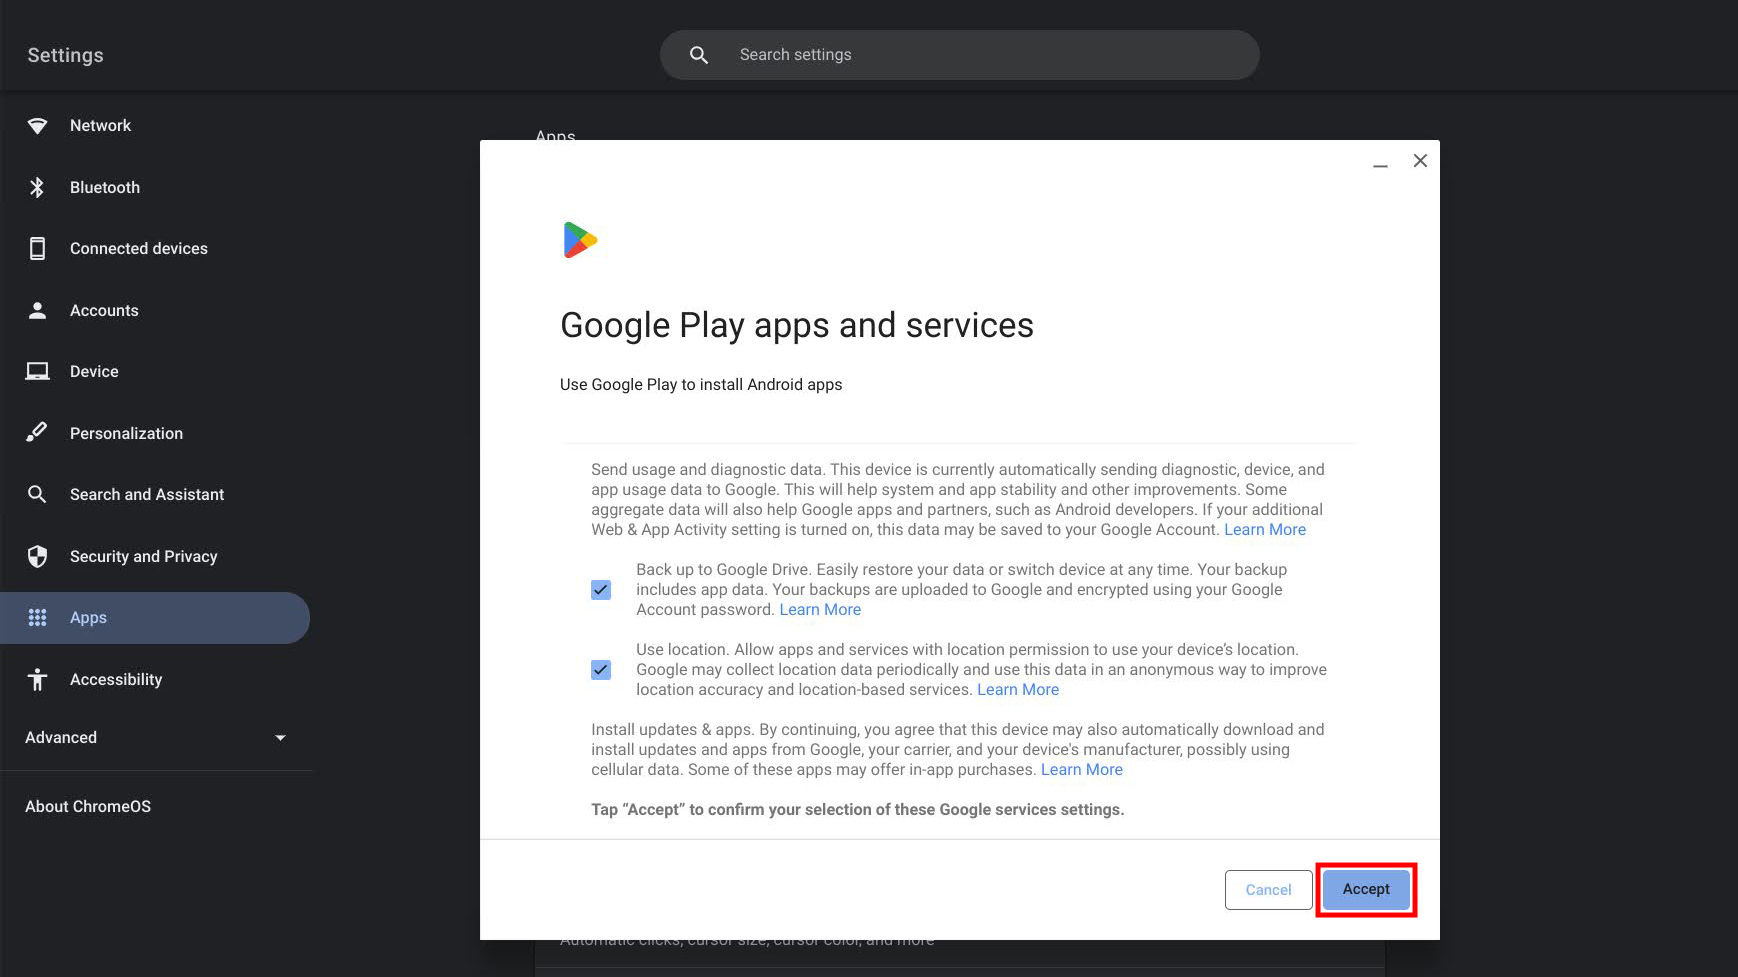 How to enable the Google Play Store on Chromebook 3